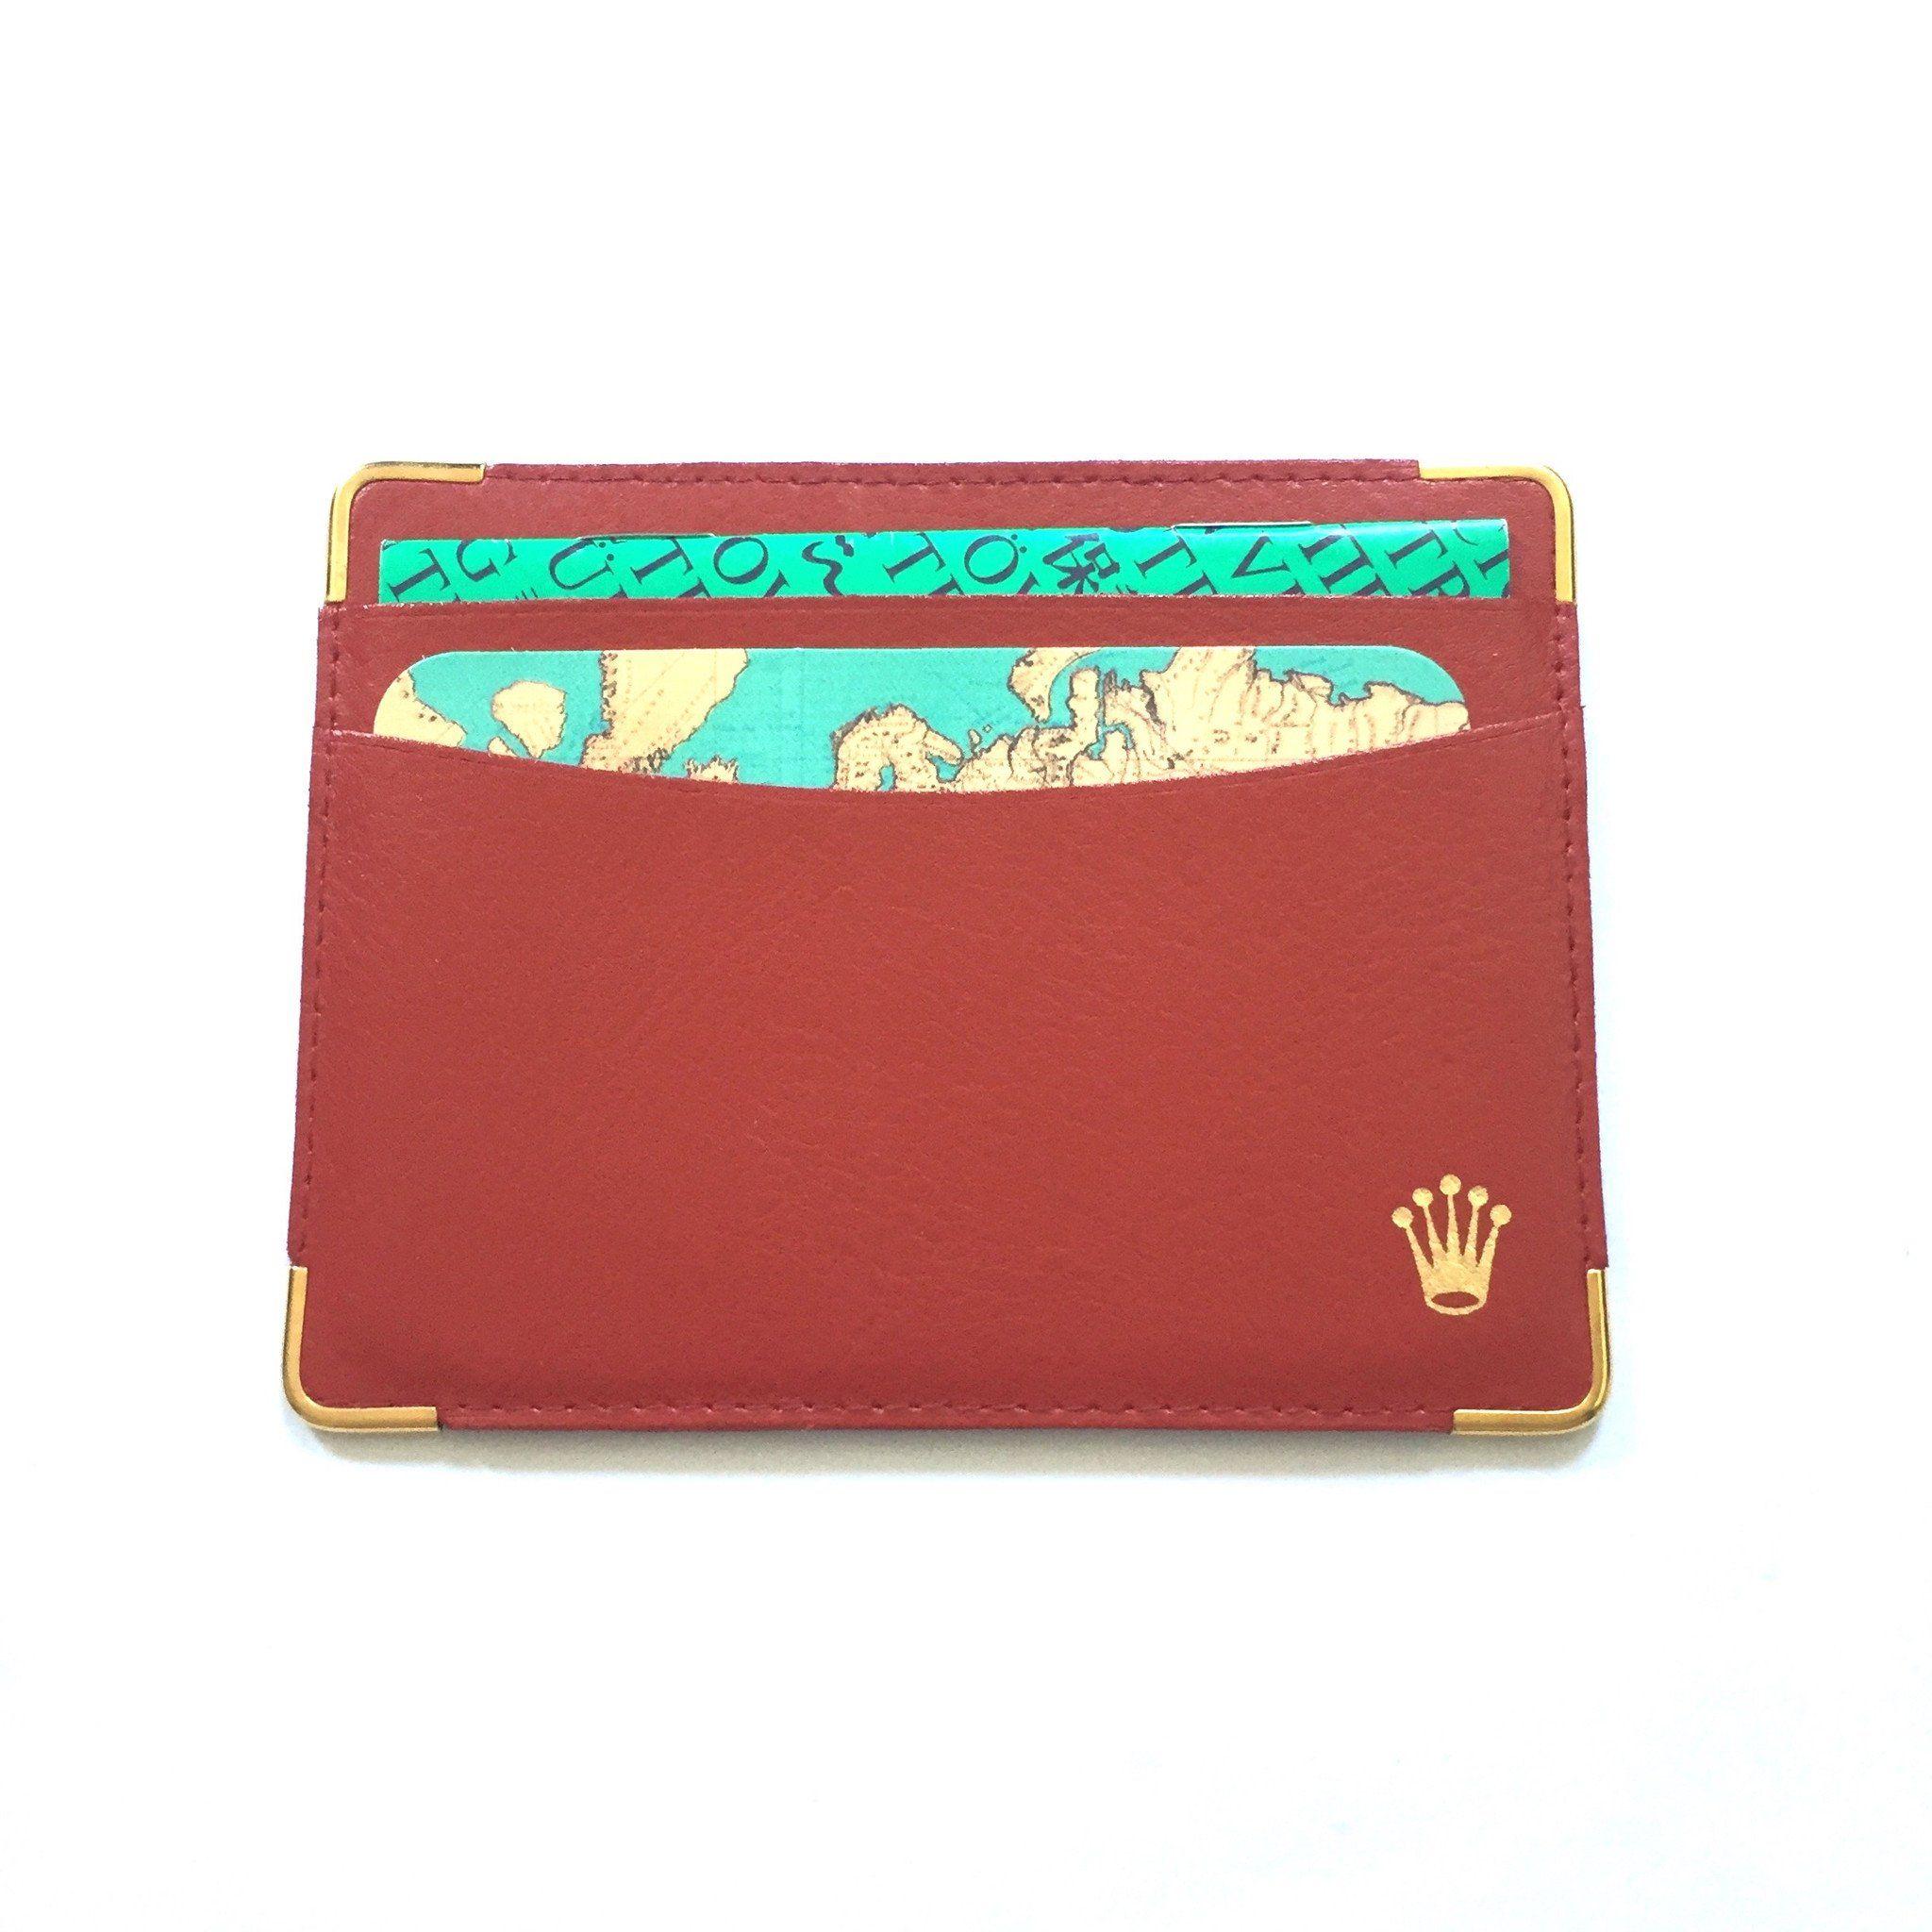 Red and Gold Crown Logo - Rolex Old Stock Dark Red Leather Card Case with Gold Crown